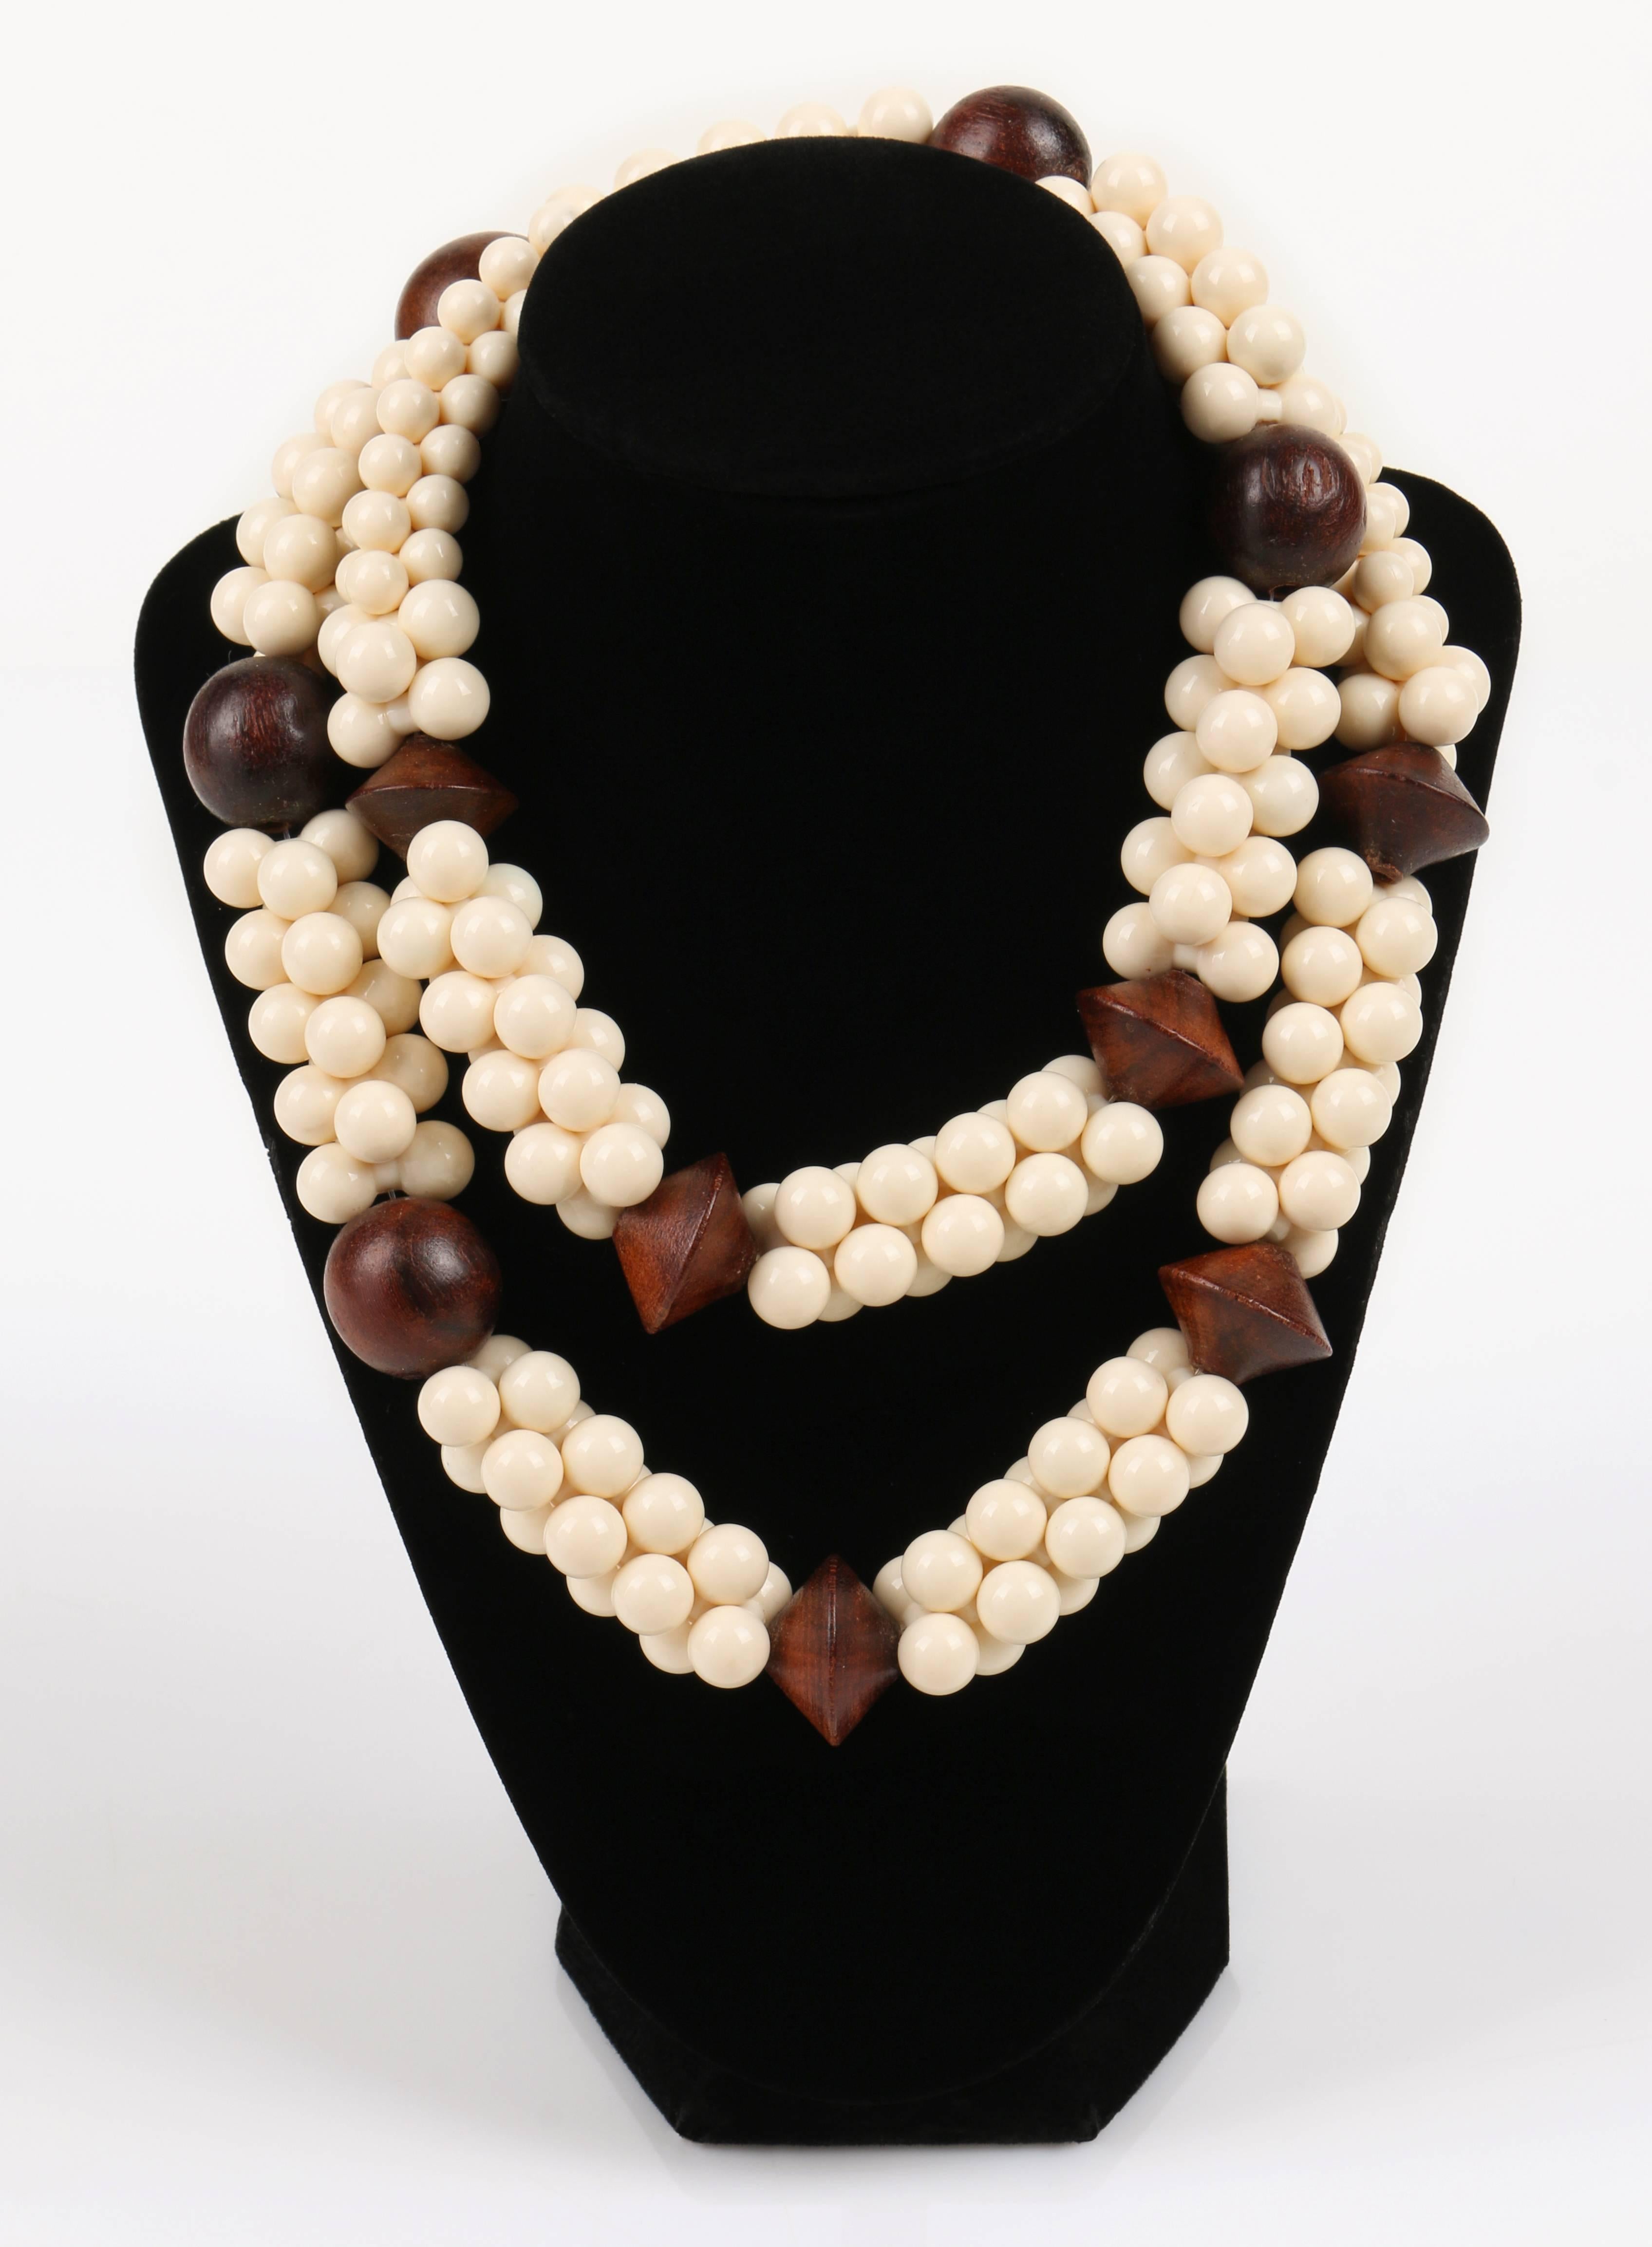 Vintage c.1967 Yves Saint Laurent African Collection chunky wood and ivory resin bead necklace. Resin interlocking beads are quar strung and divided with large wood beads. Gold tone YSL logo hook clasp. Wood beads measure approximately 1/2